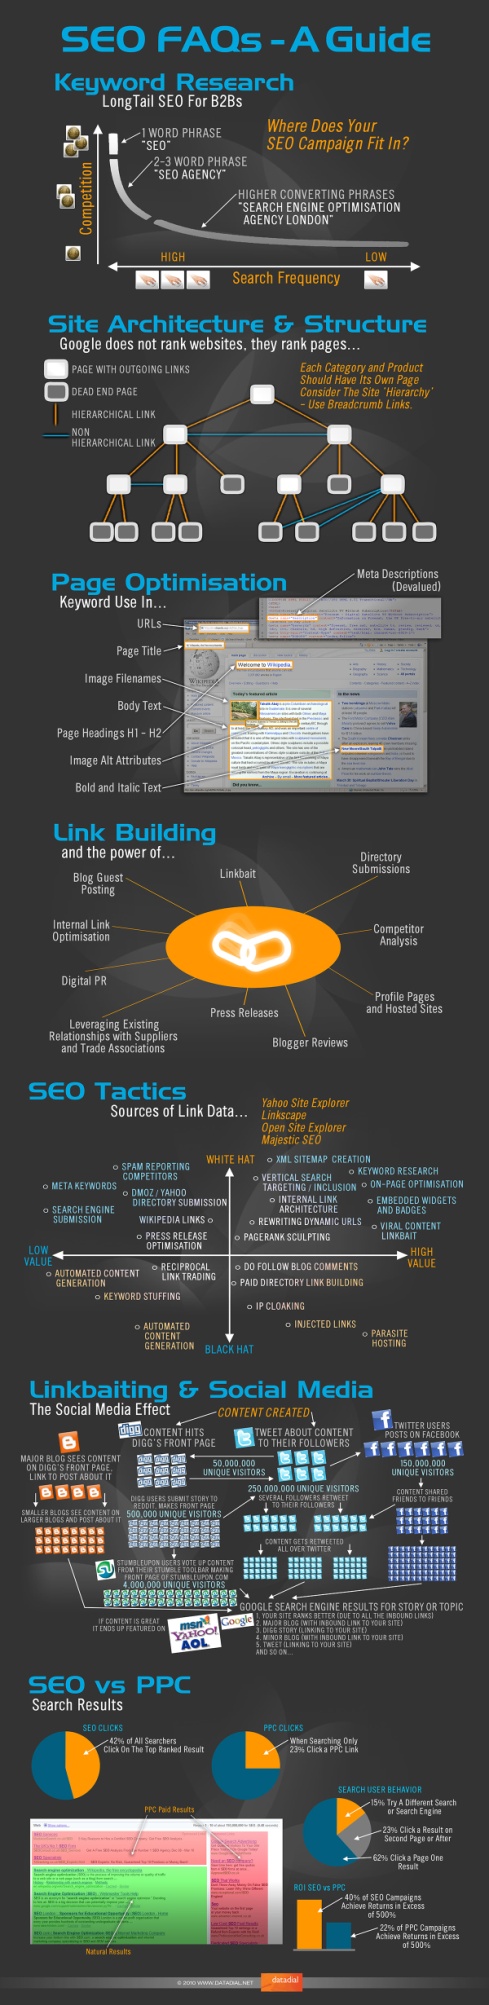 seo pictures infographic